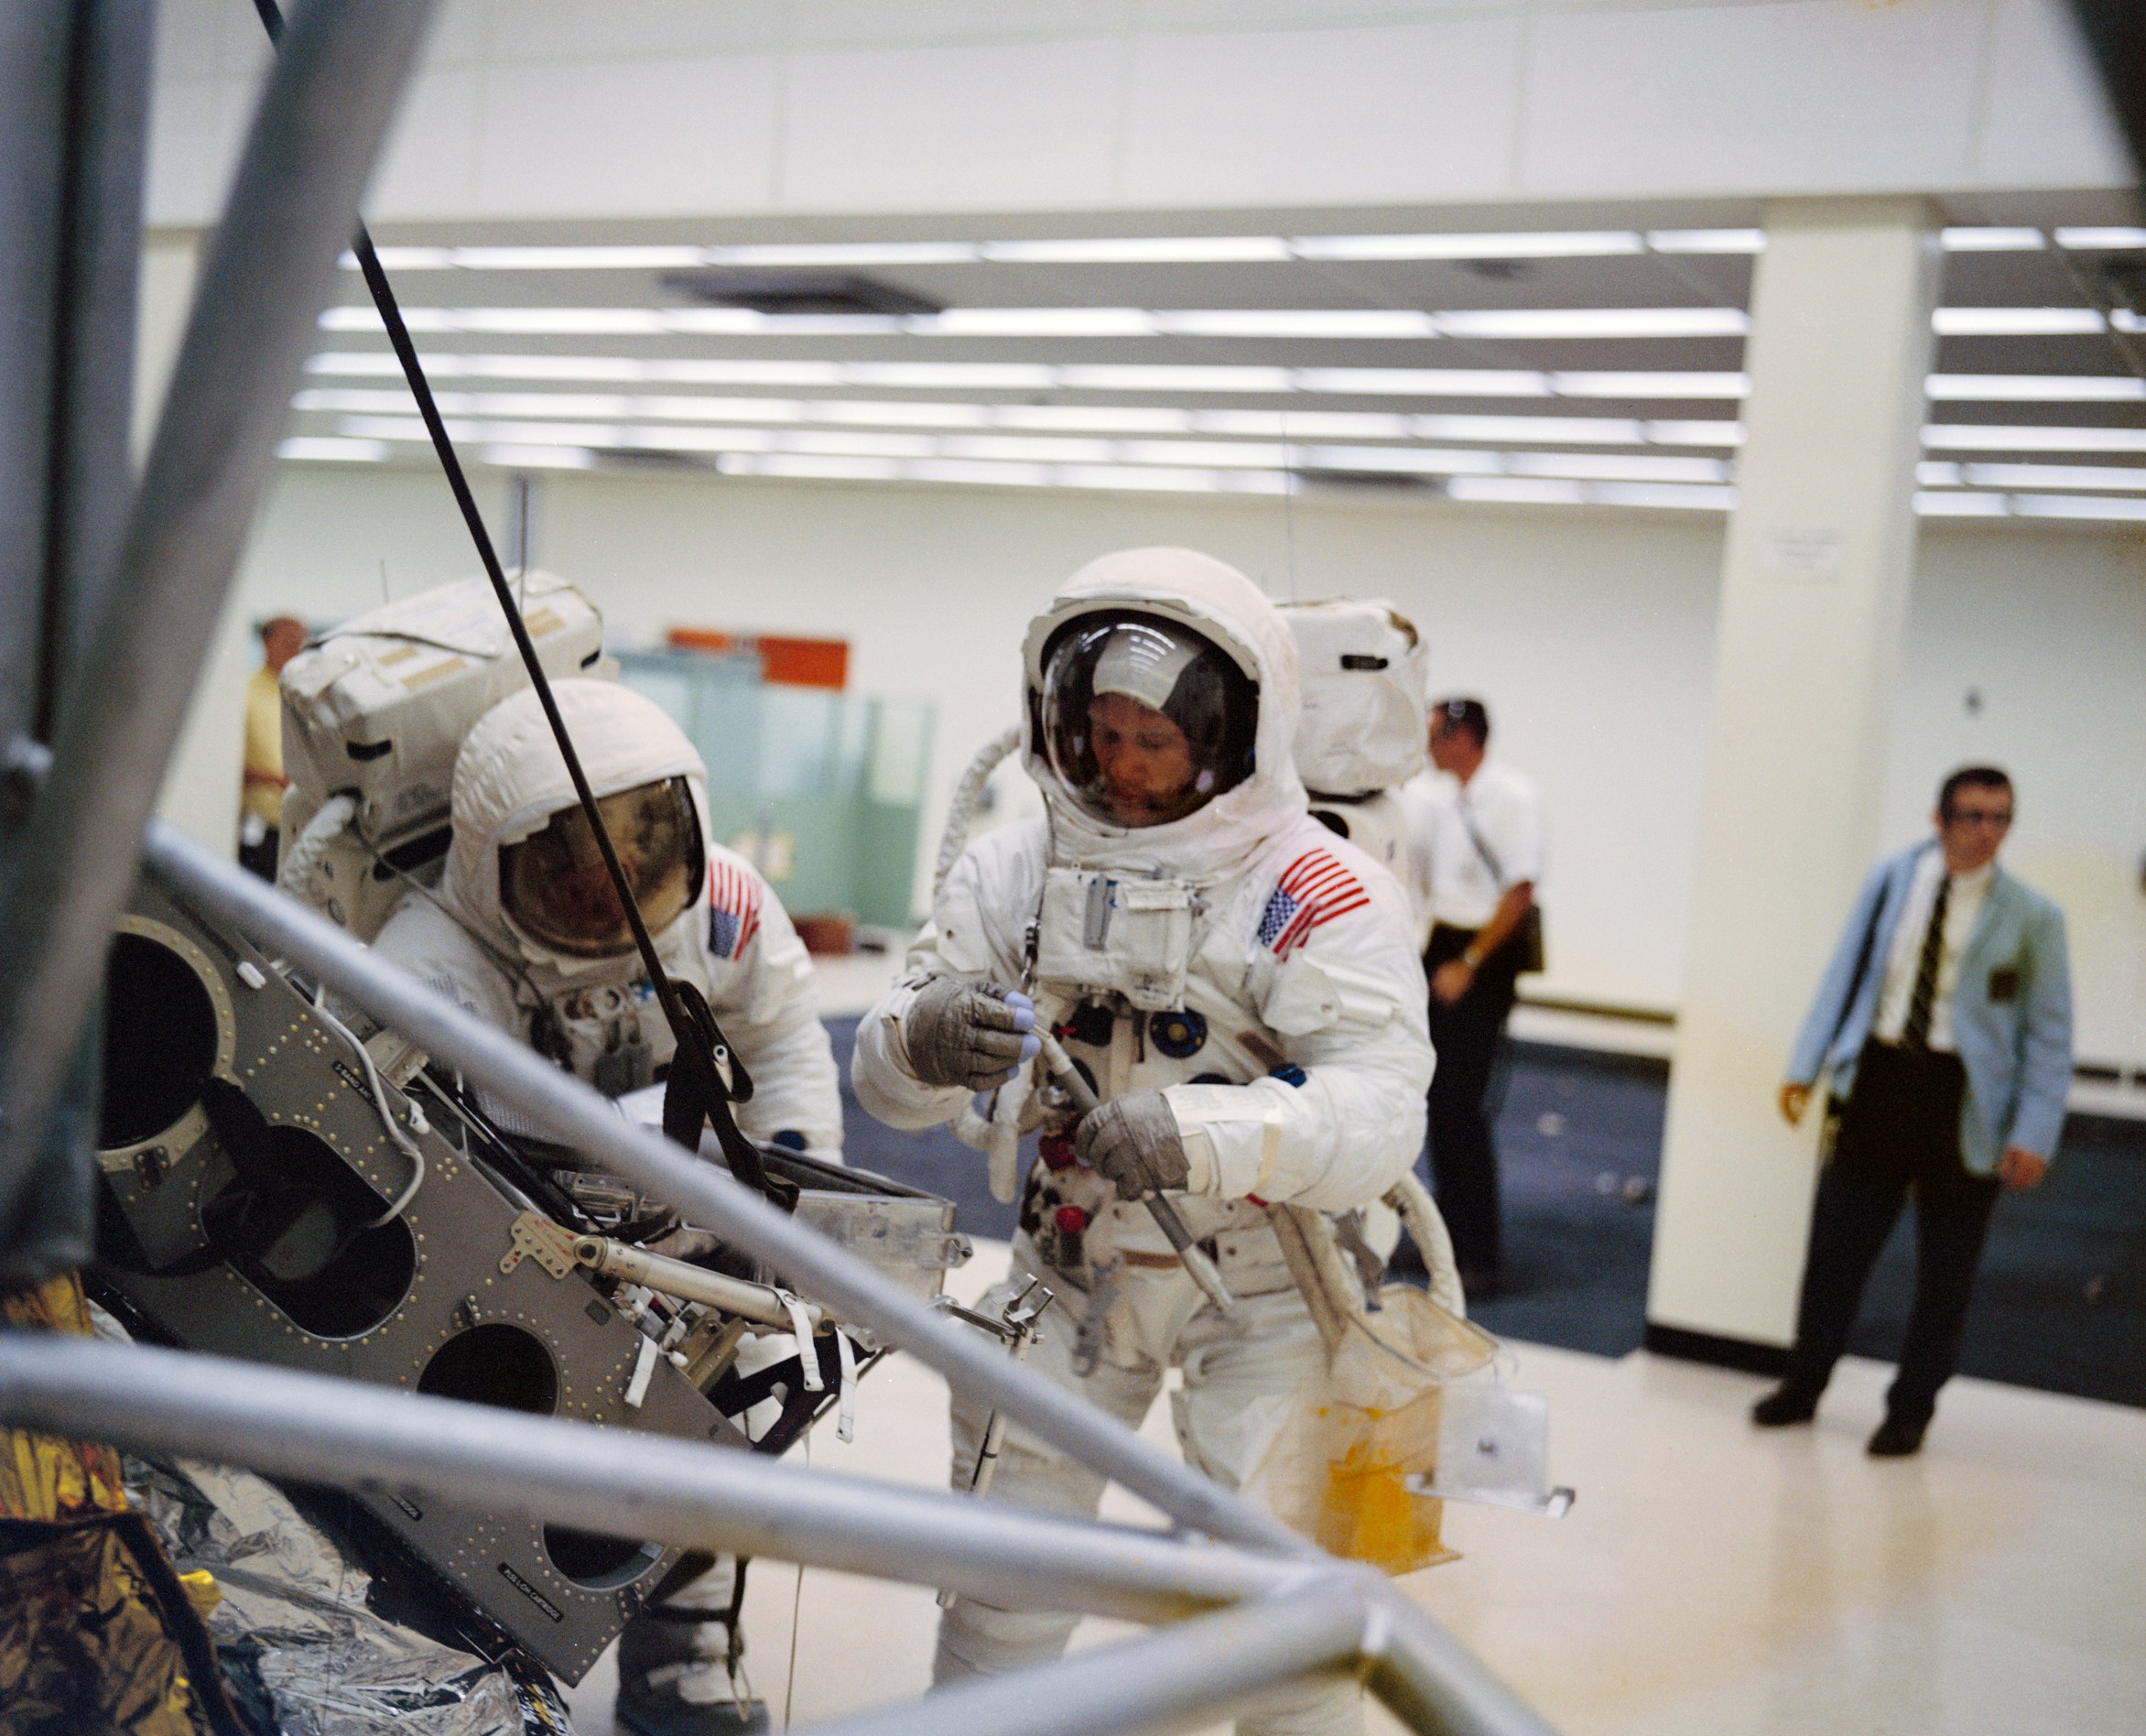 Astronauts Buzz Aldrin (L) and Neil Armstrong (R) practice extravehicular activities on May 18, 1969.